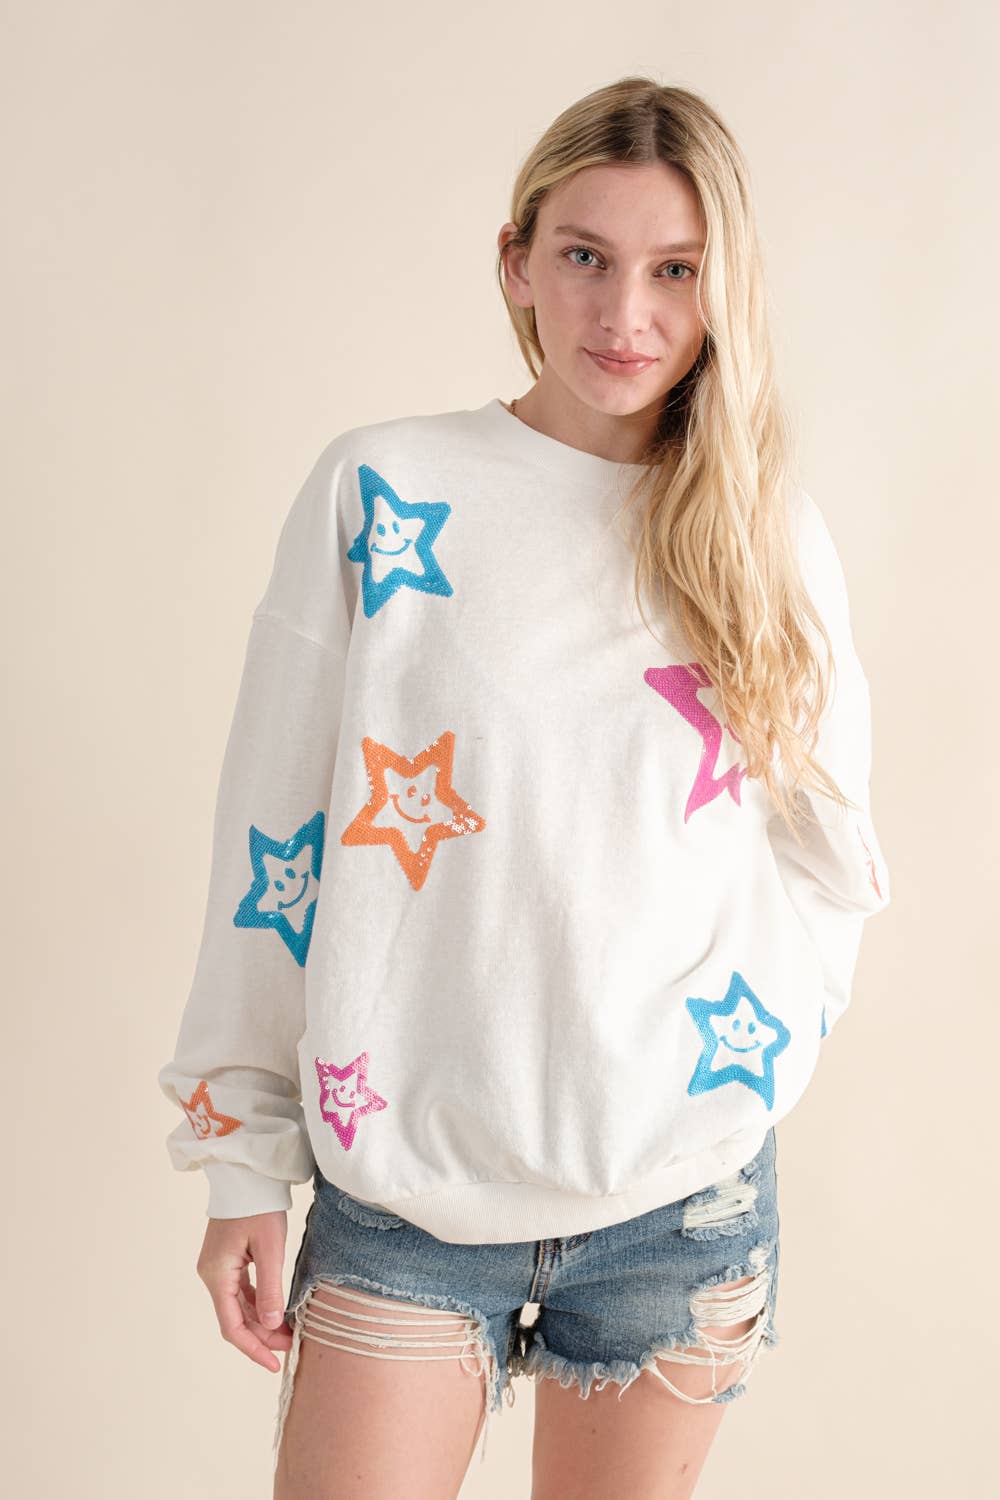 Blue B - 32960T - French Terry Star Sequin Smiley Sweatshirt: S / OFF WHITE